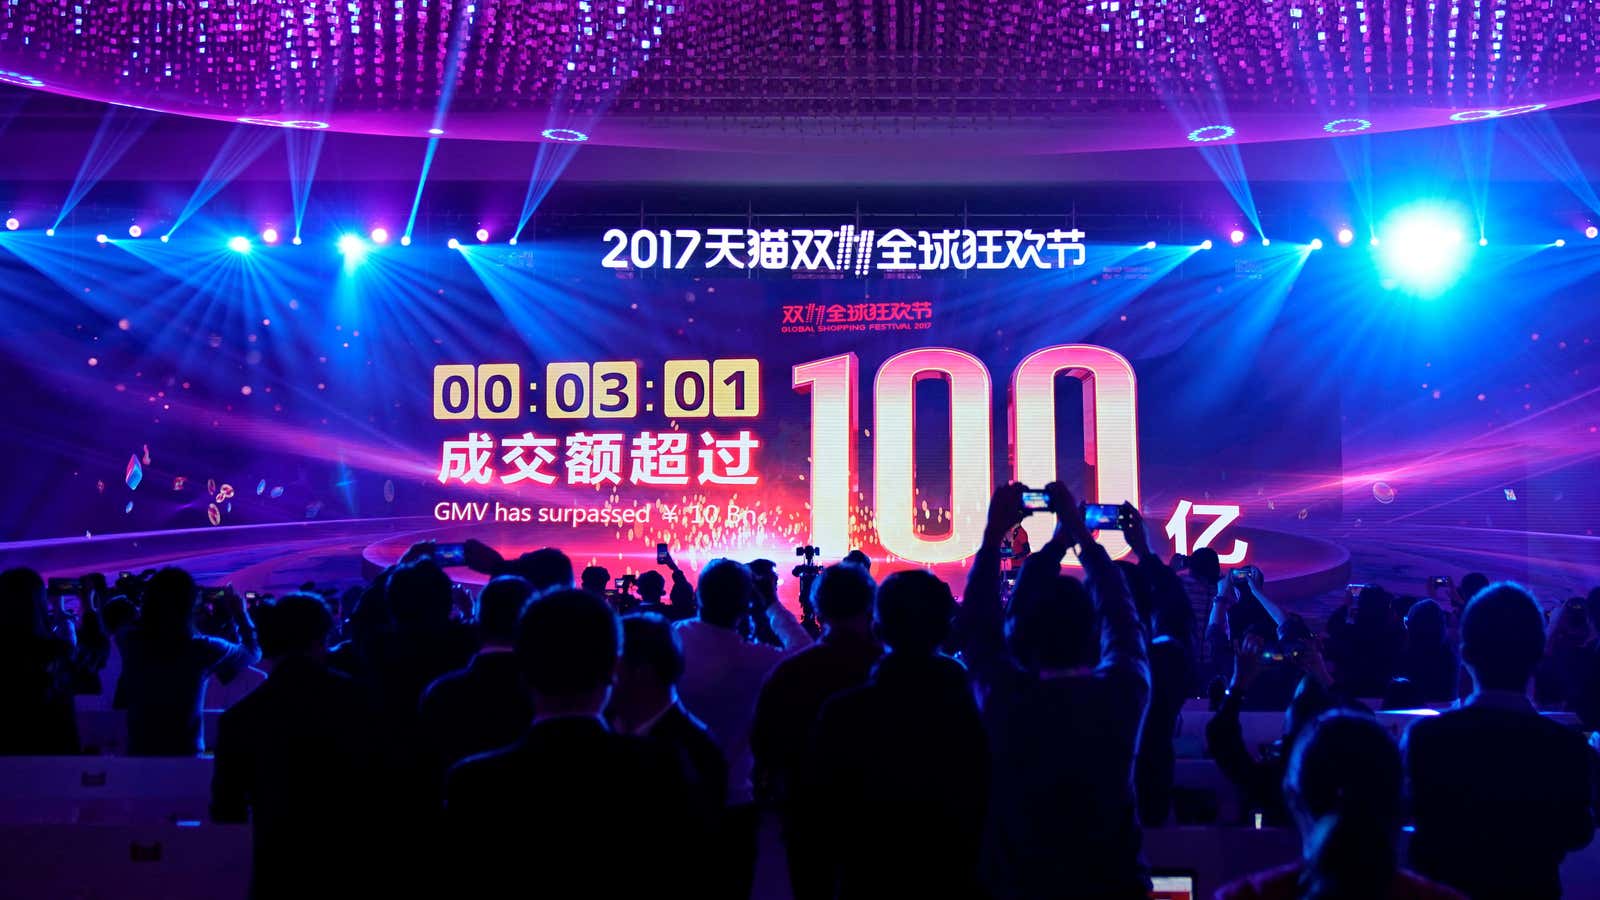 The sales frenzy of Alibaba’s Singles Day.